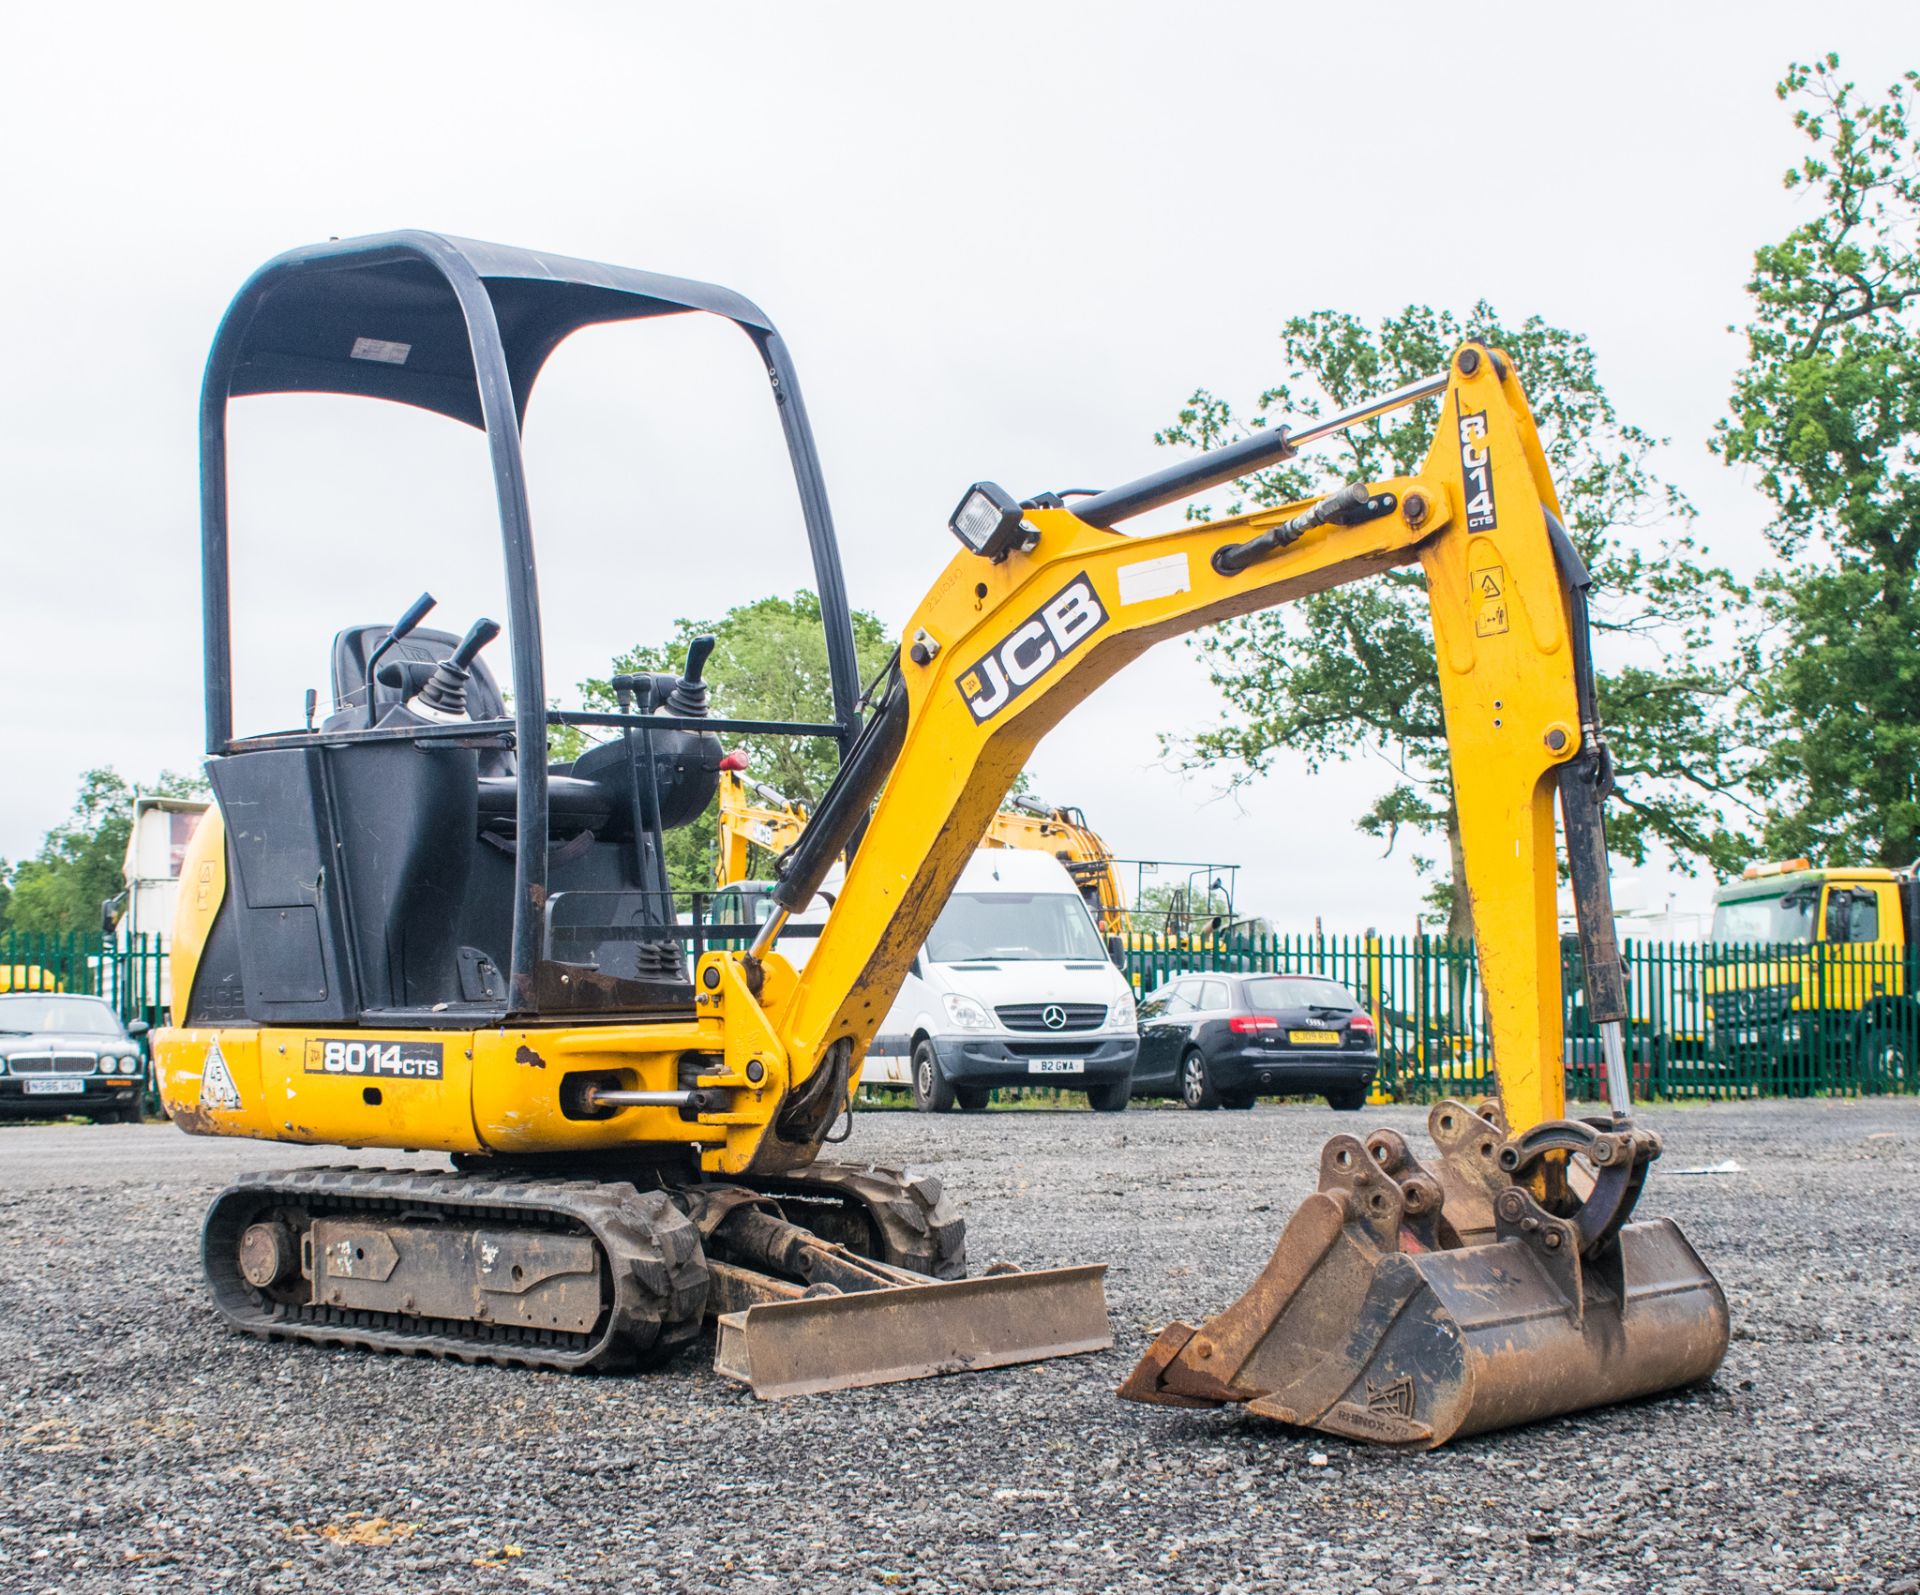 JCB 8014 CTS 1.4 tonne rubber tracked mini excavator  Year: 2014 S/N: 70501 Recorded Hours: 1178 - Image 2 of 18